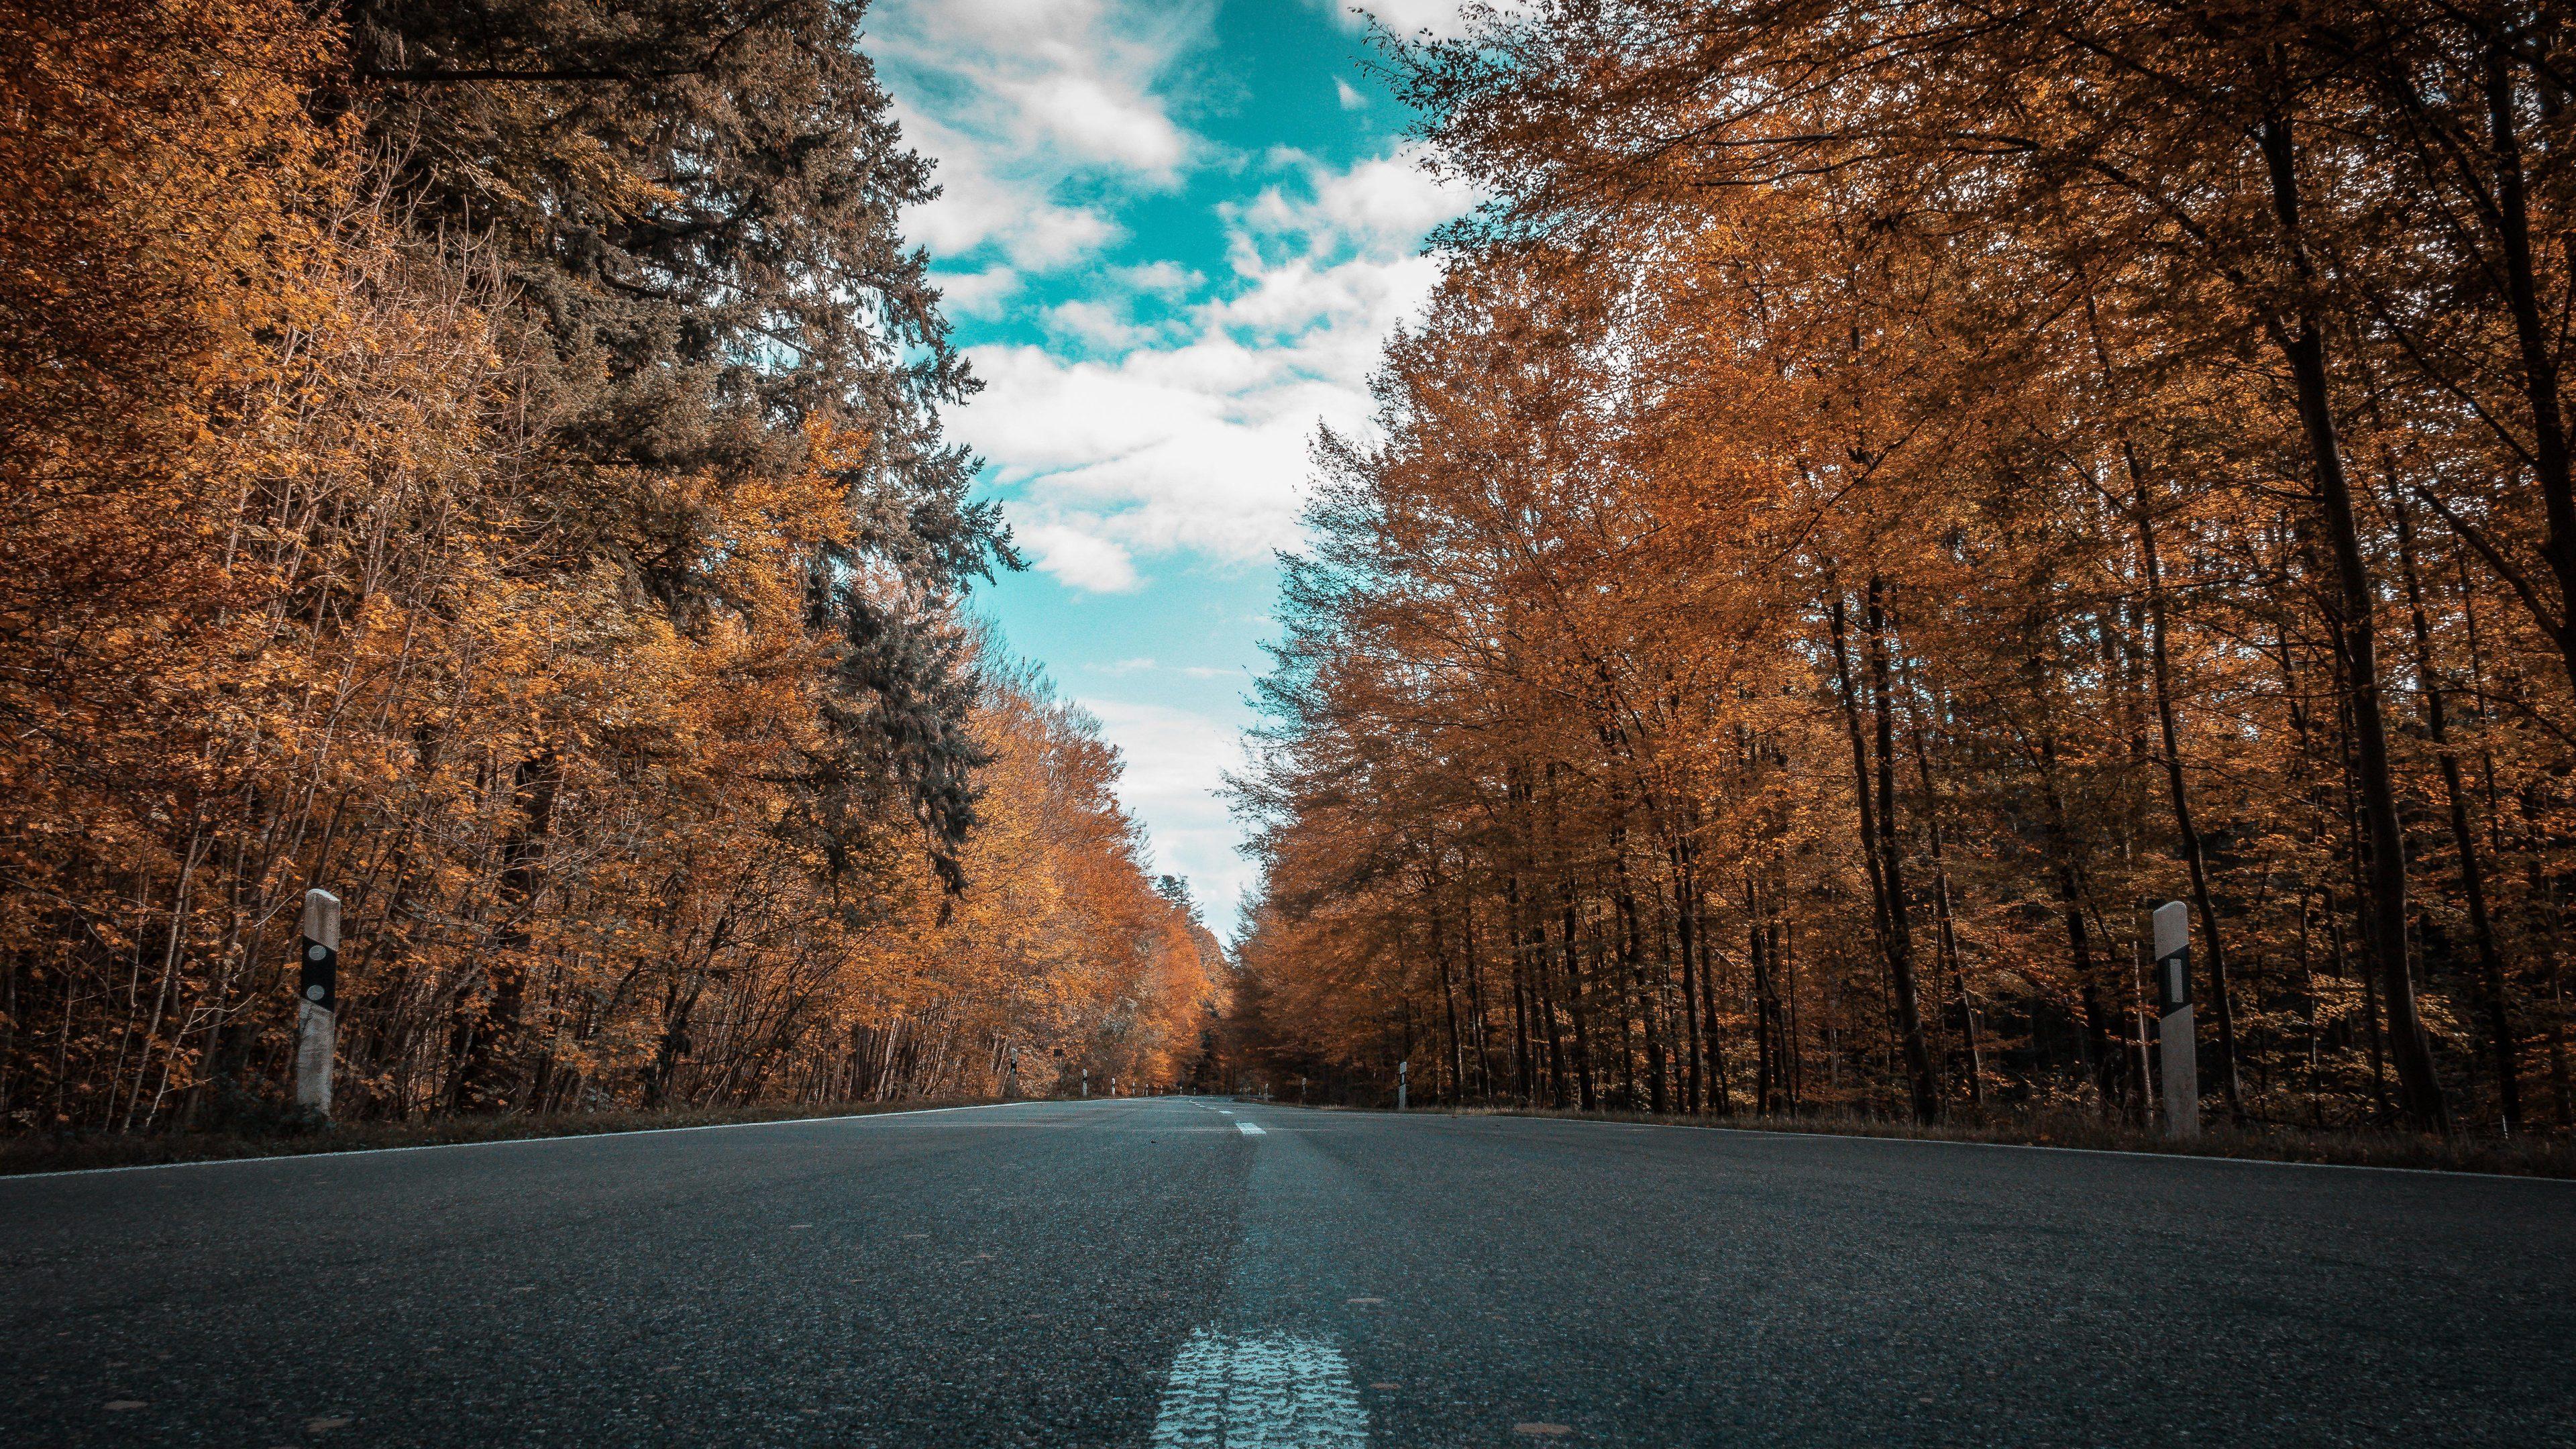 Wallpapers 4k Alone Road Forest Autumn Golden Trees Ultra 4k